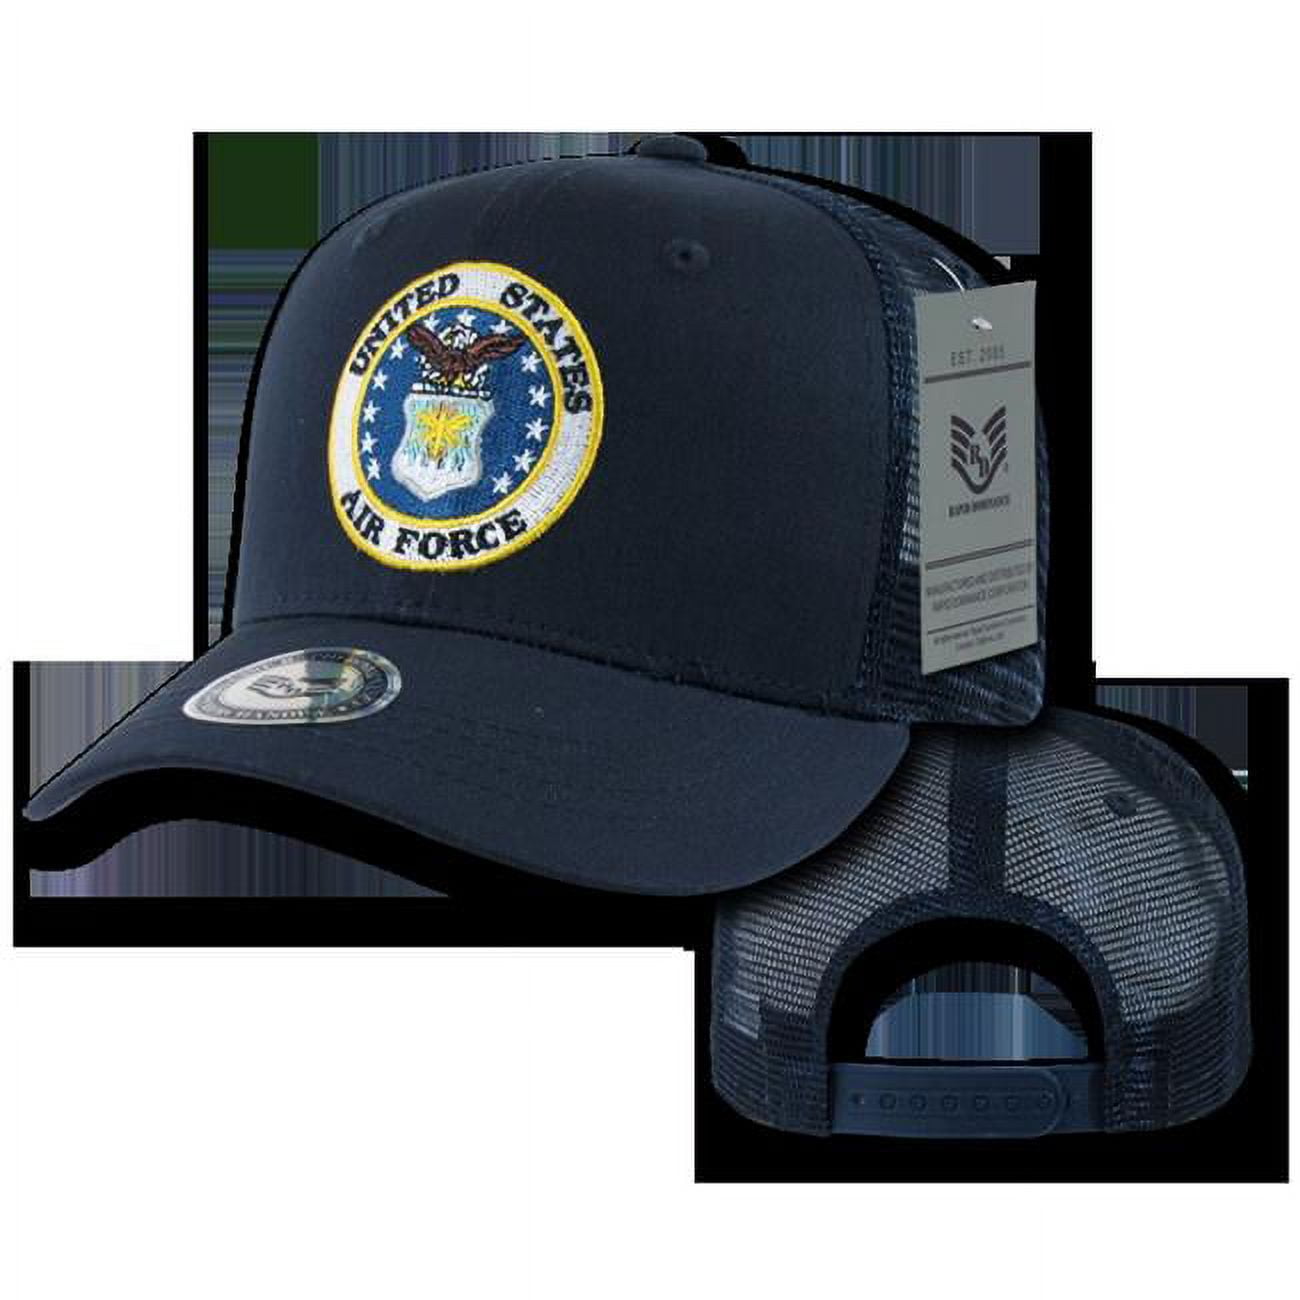 Rapid Dominance S77-AIR-NVY Back to the Navy Cap, Air Basics Mesh Force